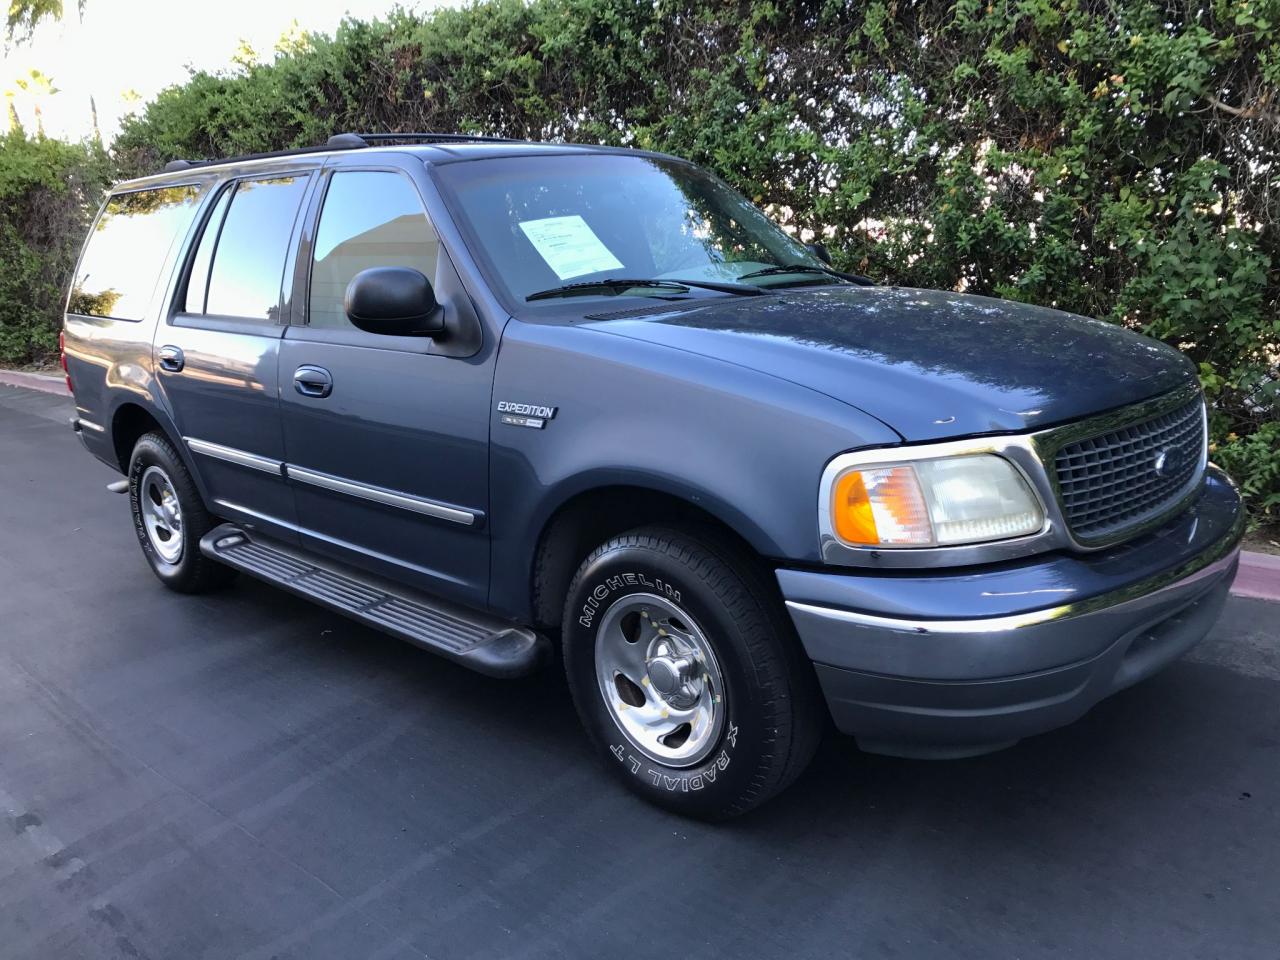 Used 2000 Ford Expedition XLT at City Cars Warehouse Inc